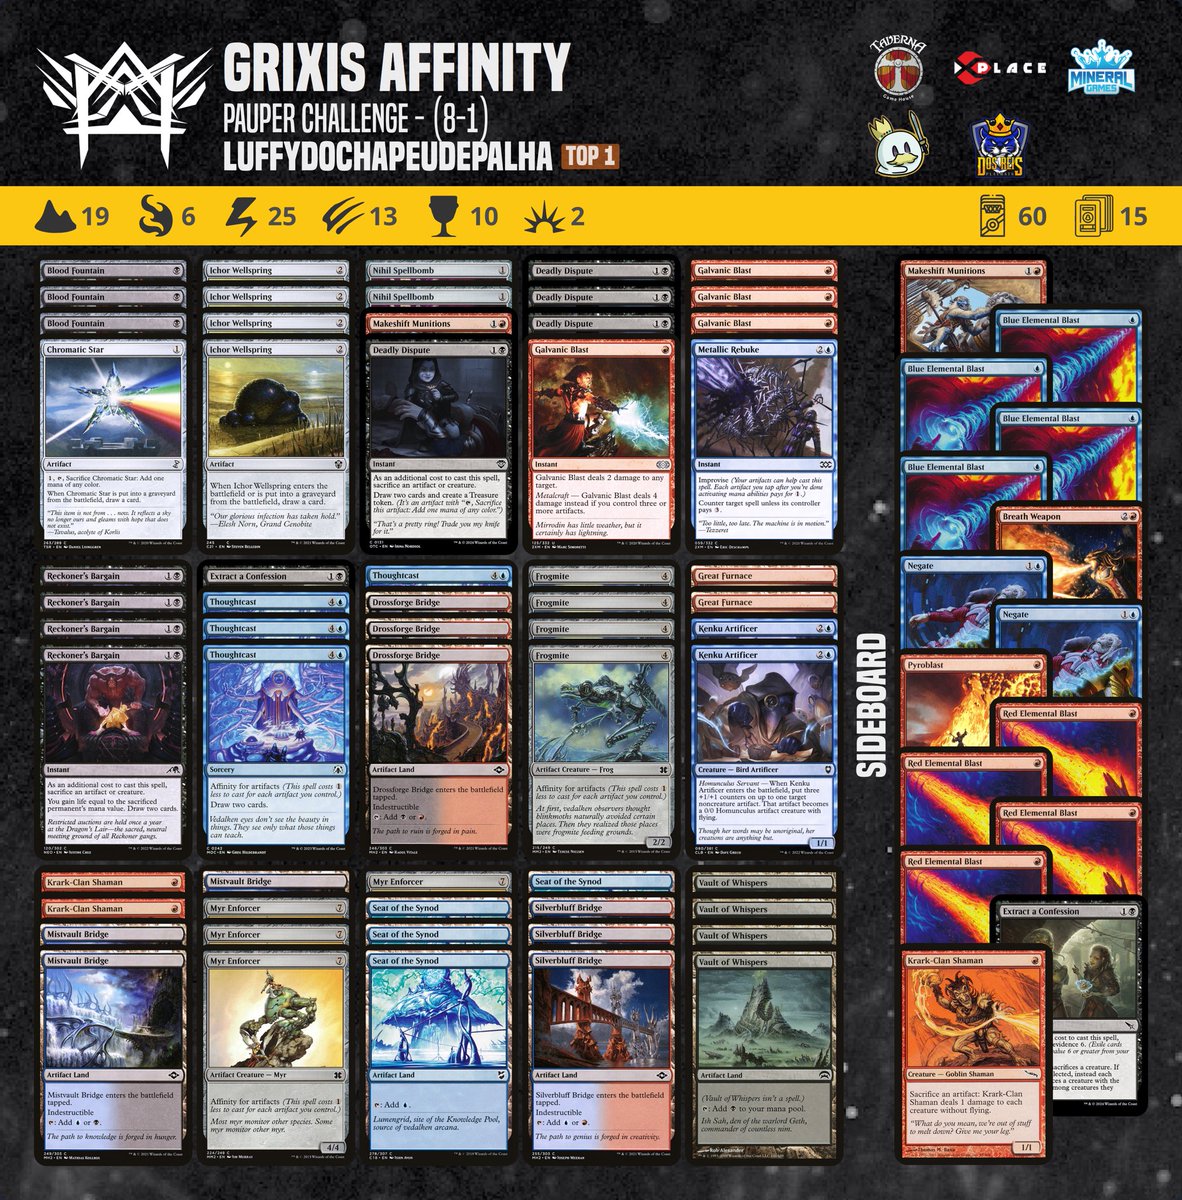 Our athlete @GabrielLuffyDCP won first place in the Pauper Challenge tournament with this Grixis Affinity deck.

#pauper  #magic #mtgcommon #metagamepauper #mtgpauper #magicthegathering #wizardsofthecoast 

@PauperDecklists @fireshoes